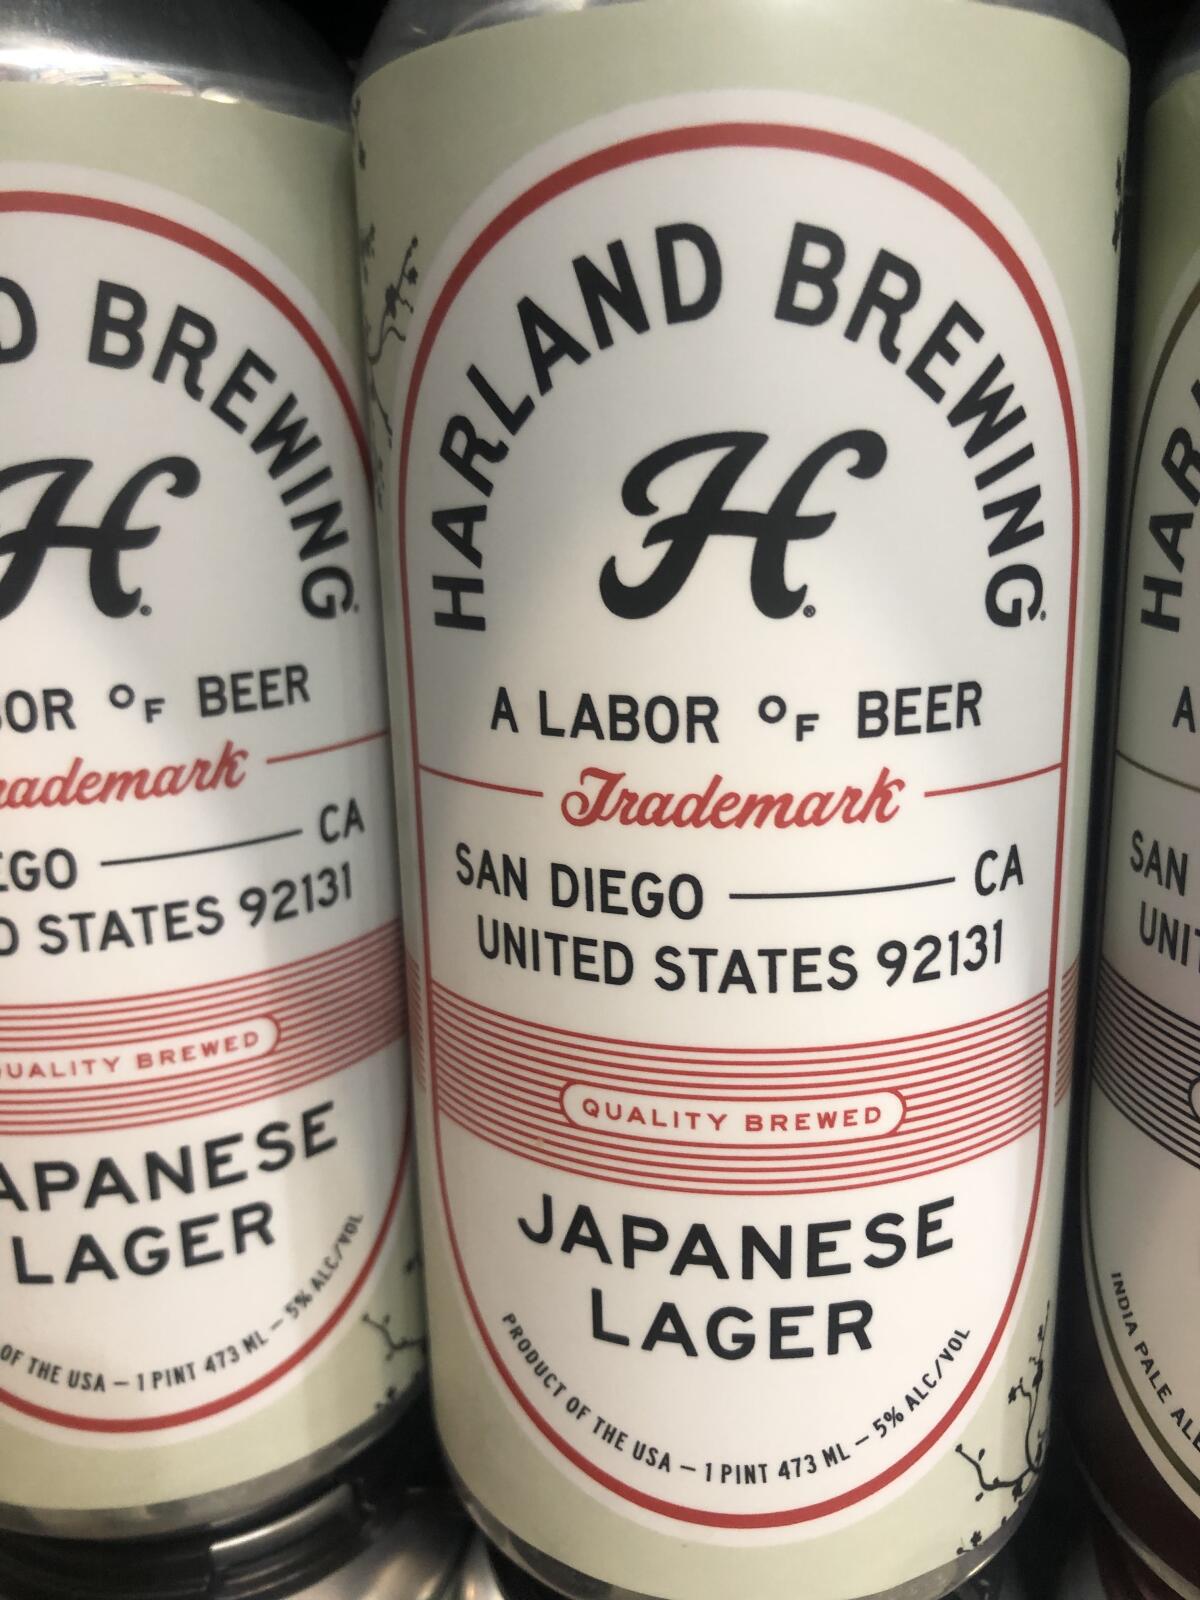 Japanese Lager from Harland Brewing